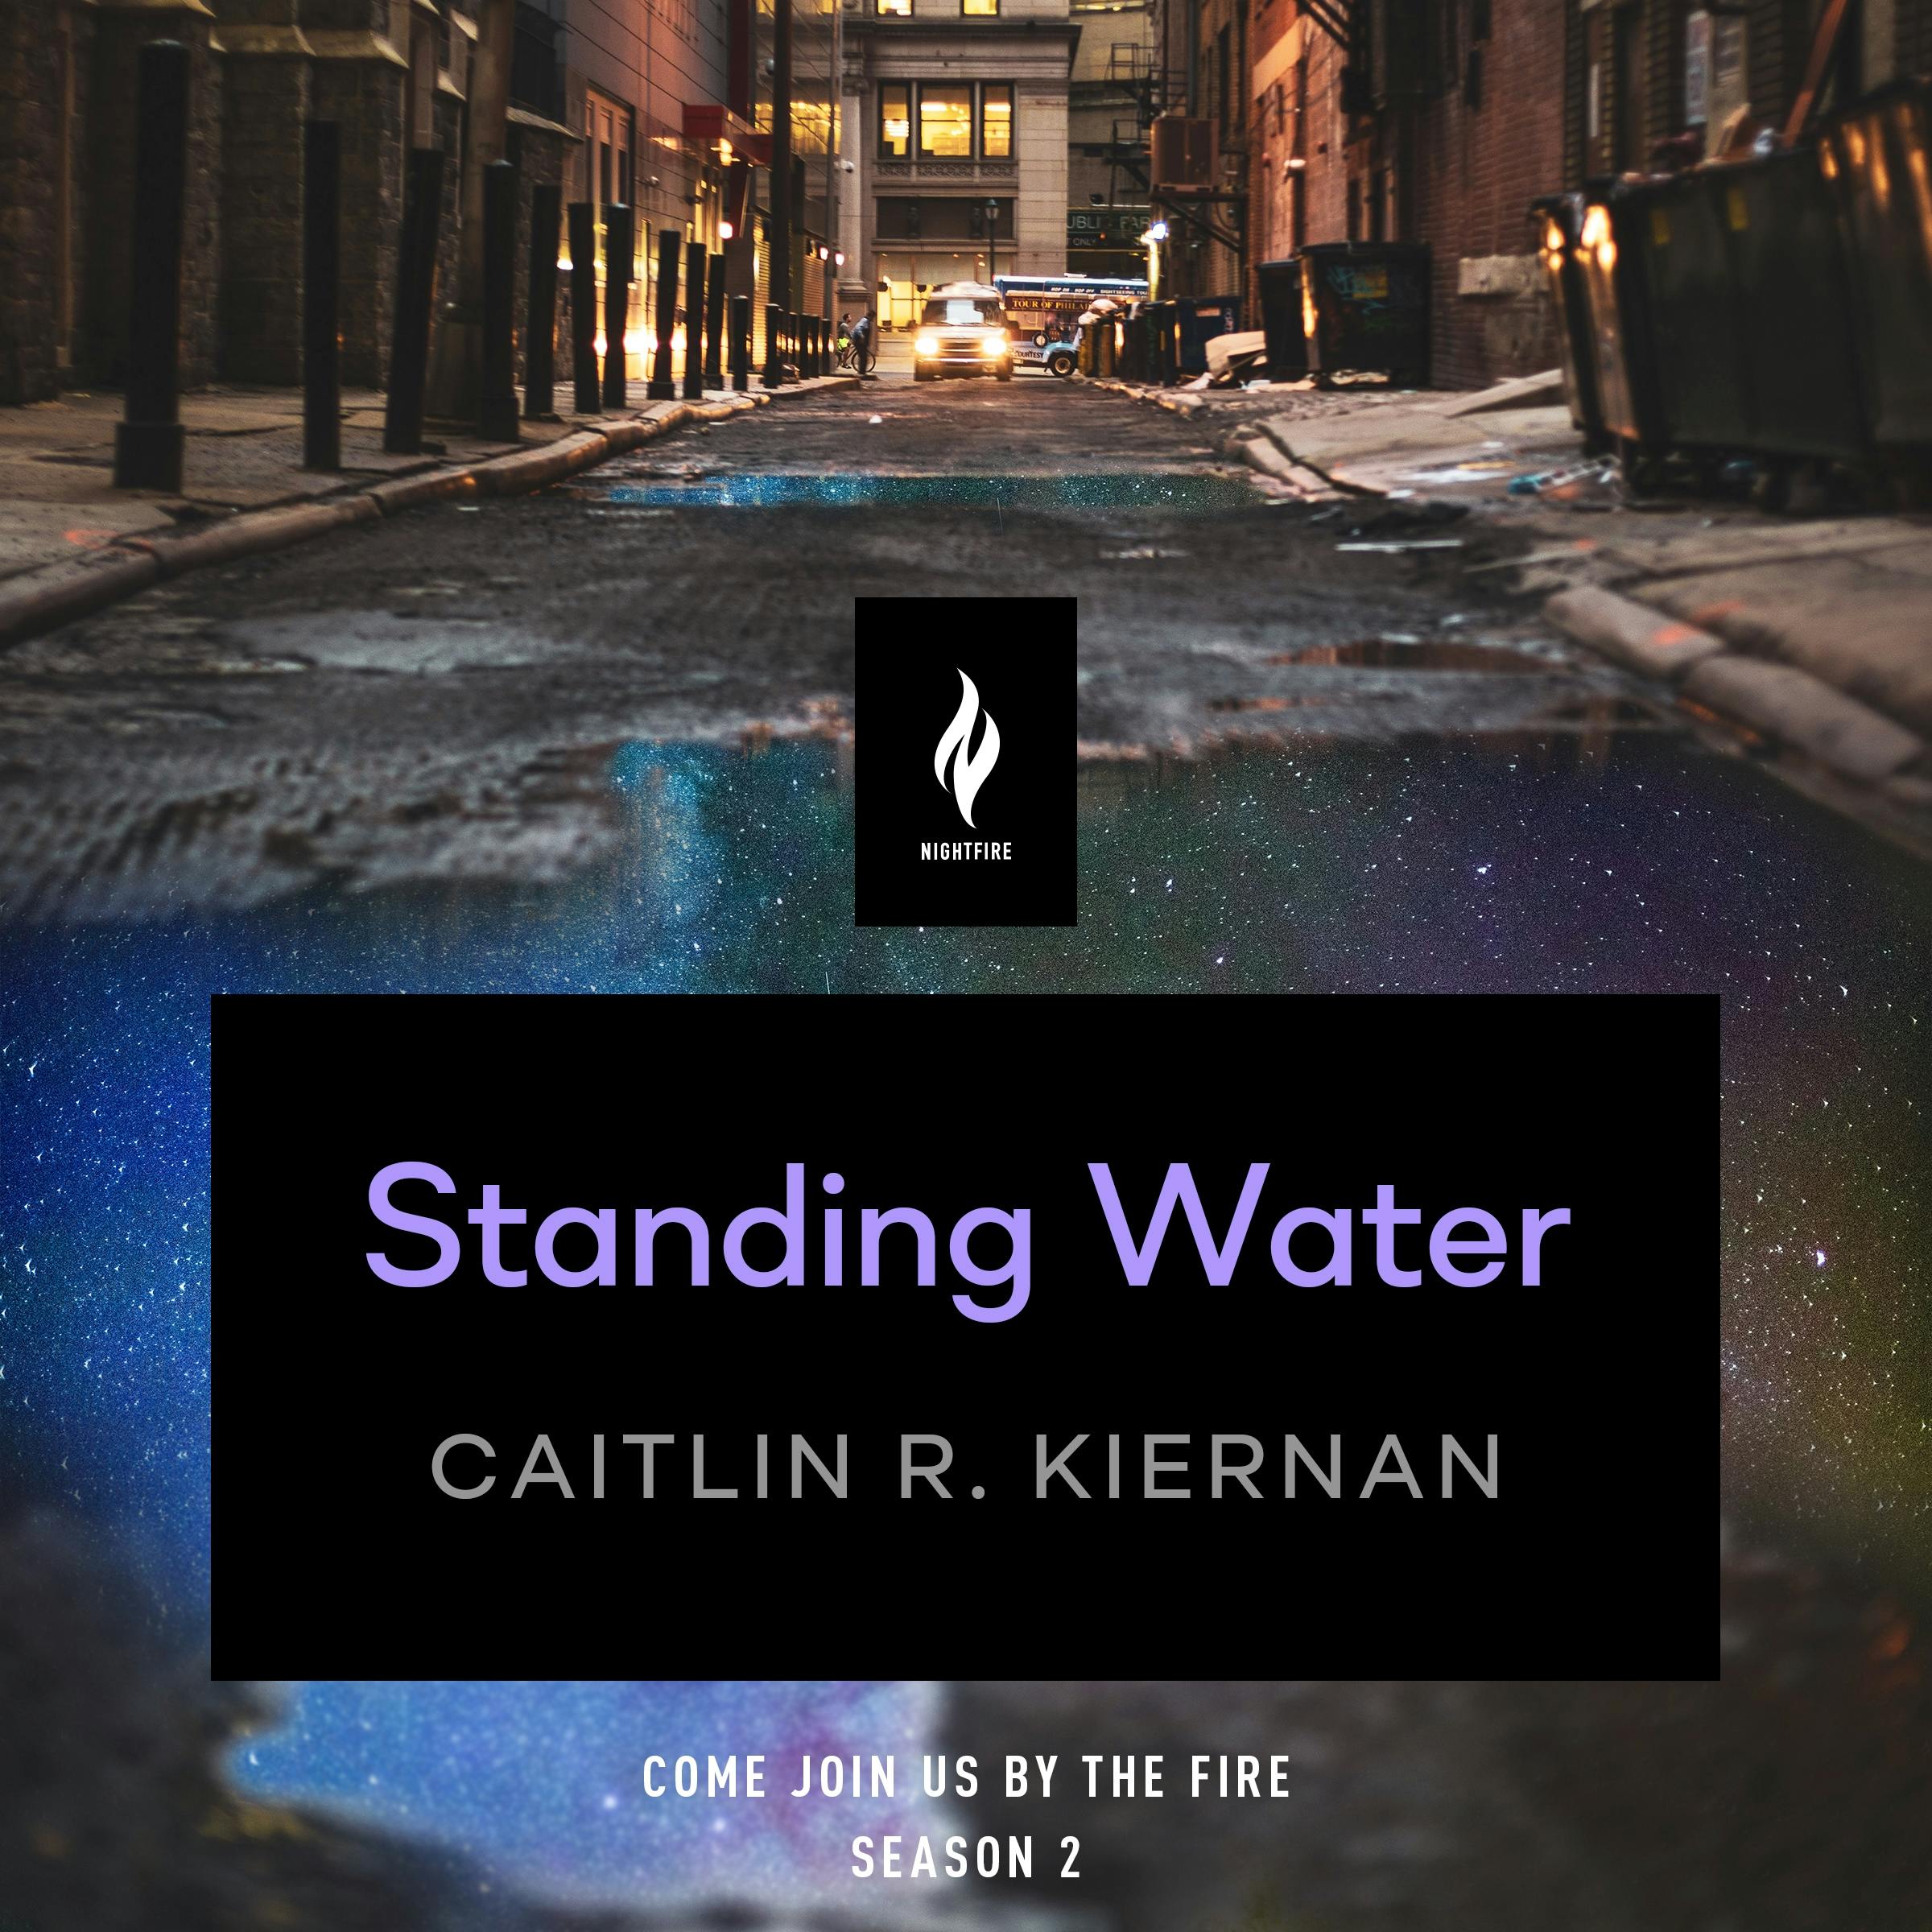 Cover for the book titled as: Standing Water